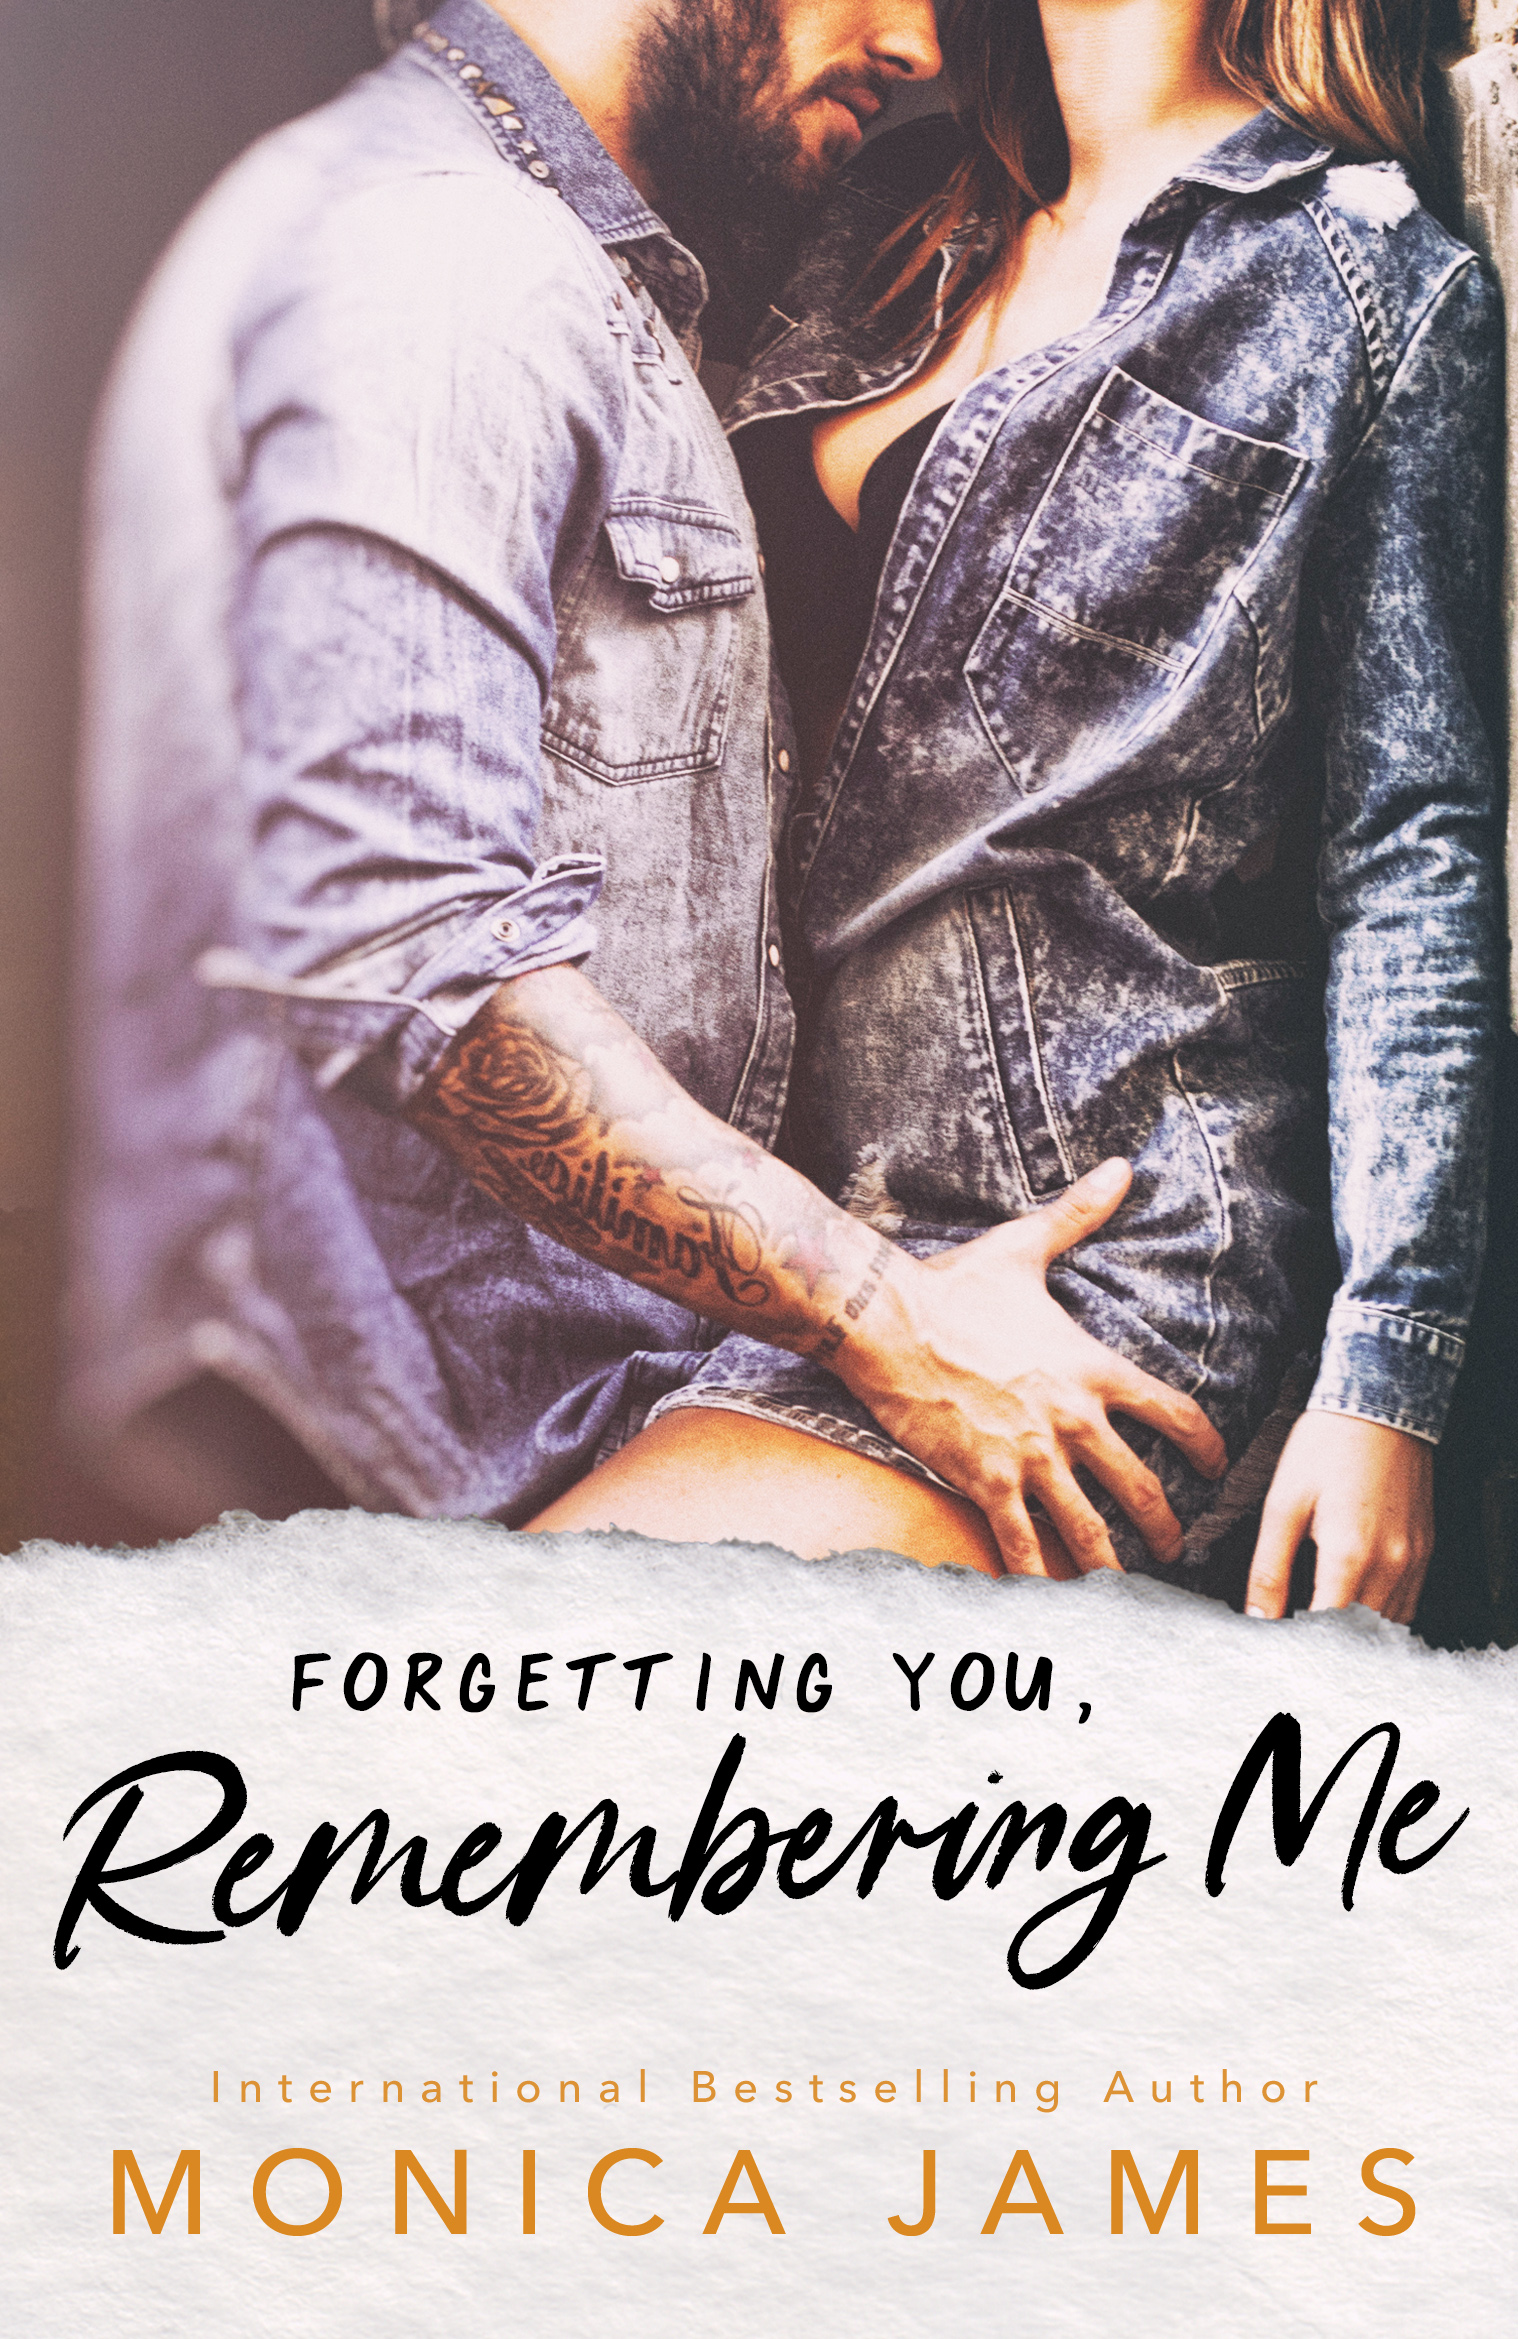 Forgetting you, remembering me